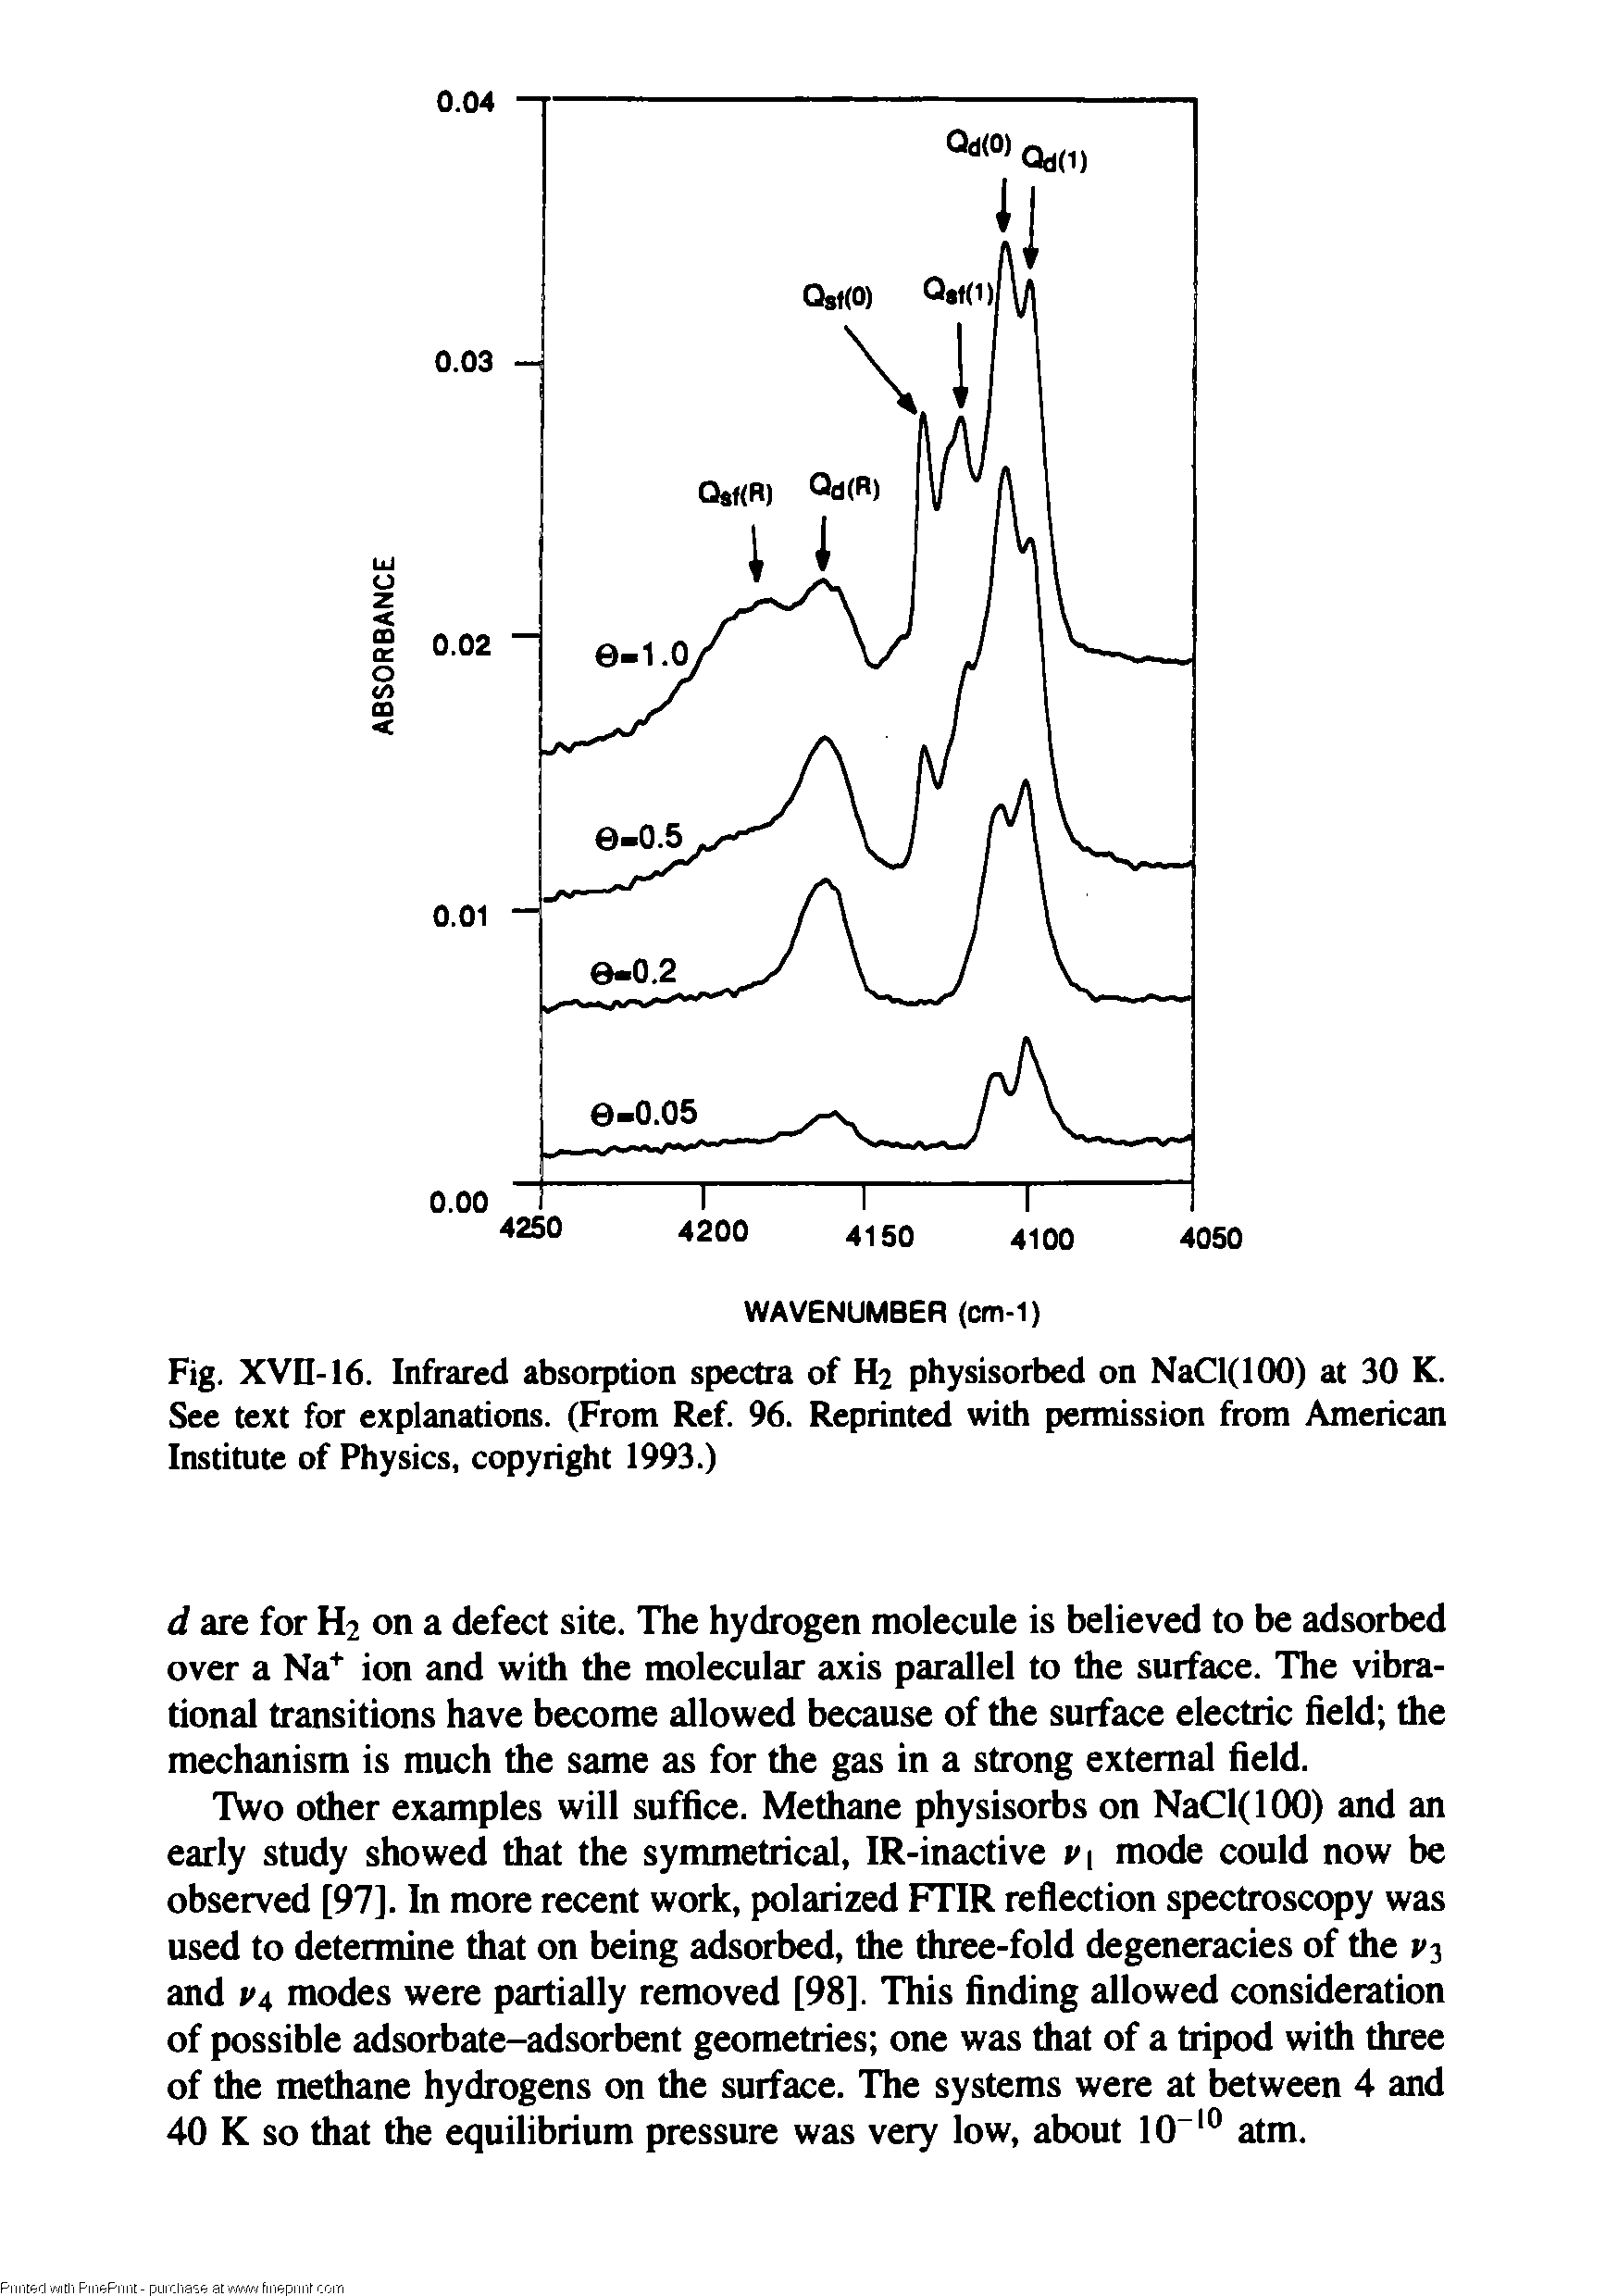 Fig. XVn-16. Infrared absorption spectra of H2 physisorbed on NaCl(lOO) at 30 K. See text for explanations. (From Ref. 96. Reprinted with permission from American Institute of Physics, copyright 1993.)...